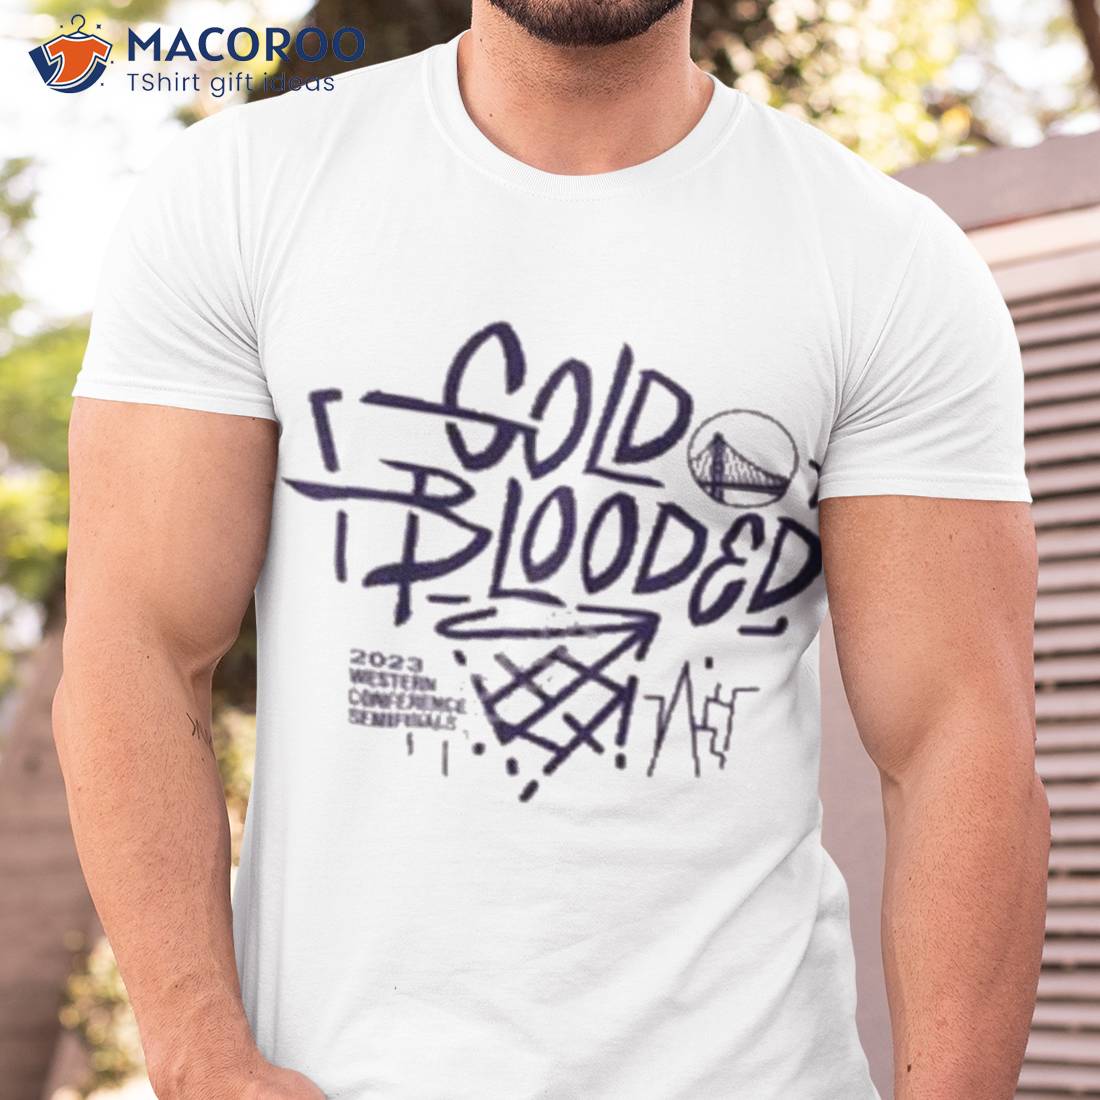 warriors gold blooded t shirts